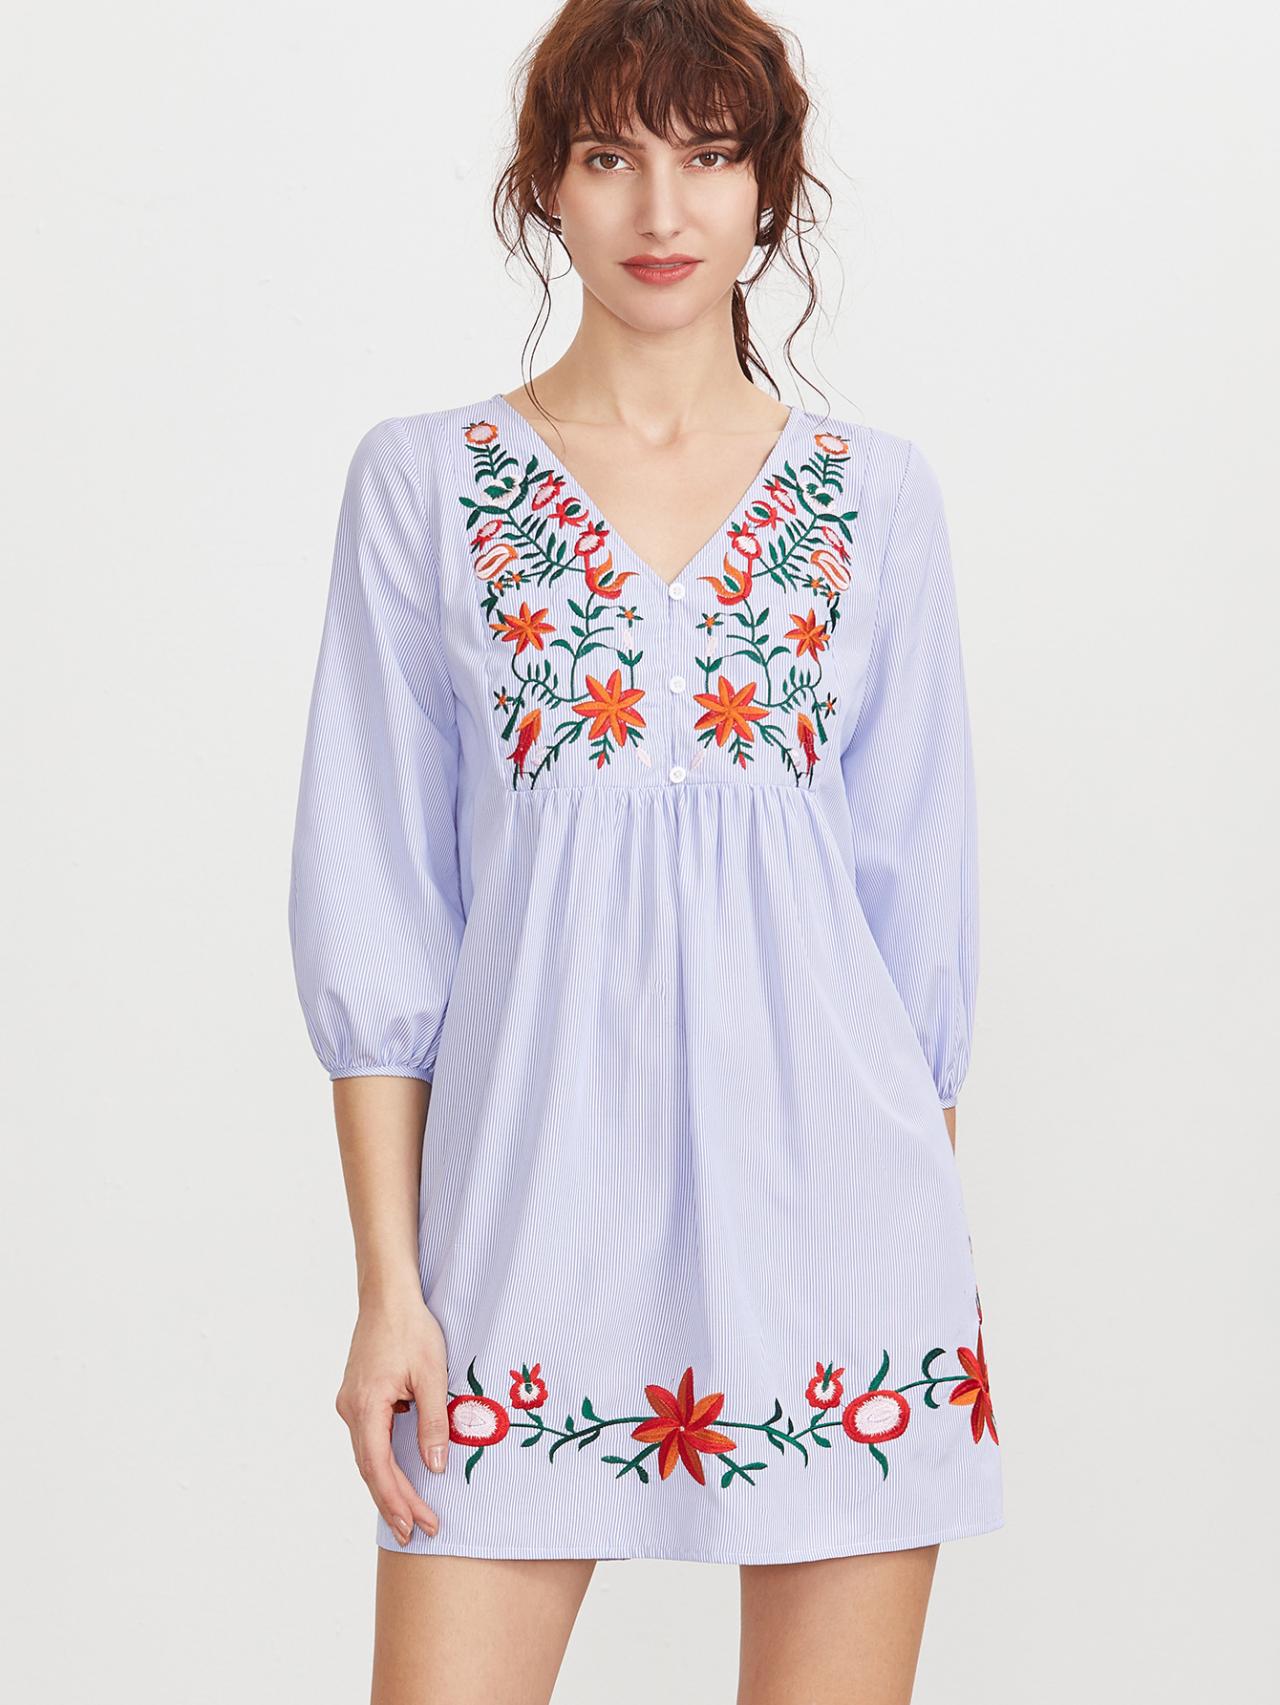 Floral Embroidered Blue Striped Short Shift Dress Featuring Plunging Neck And Puff Sleeve